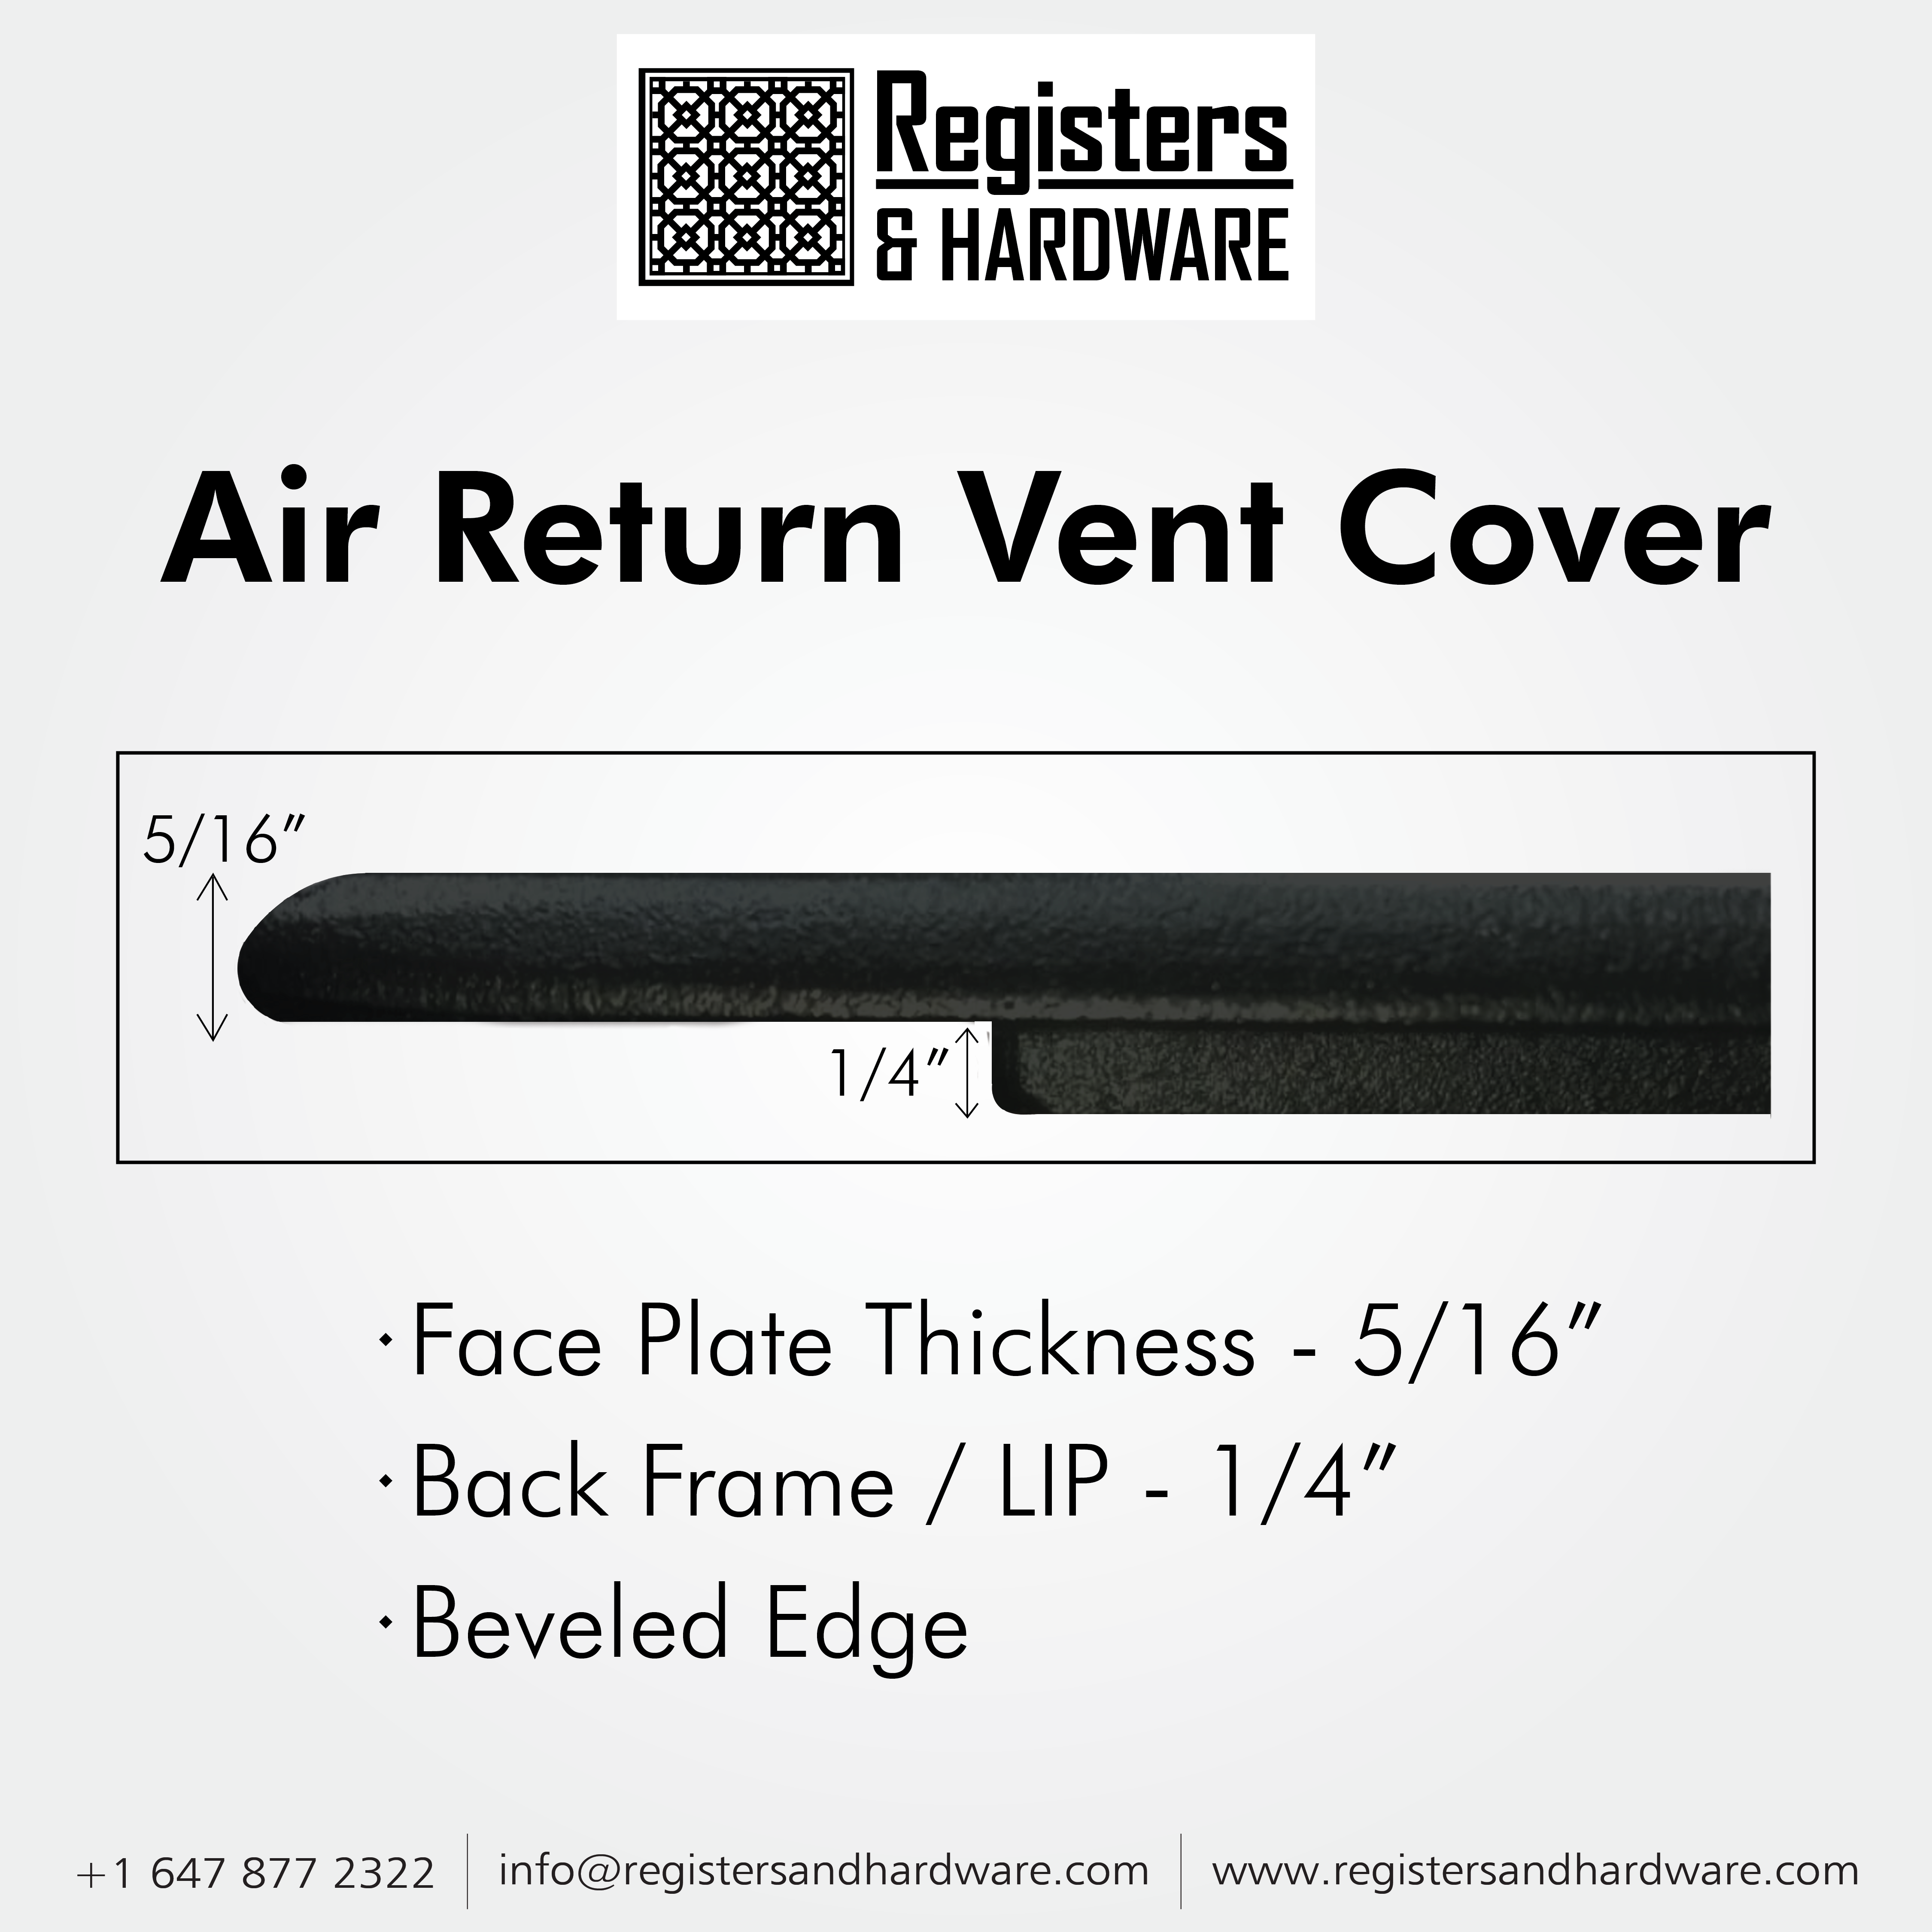 Achtek AIR RETURN 14"x24" Duct Opening (Overall Size 16"x26") | Heavy Cast Aluminum Air Grille HVAC Duct || Powder Coated